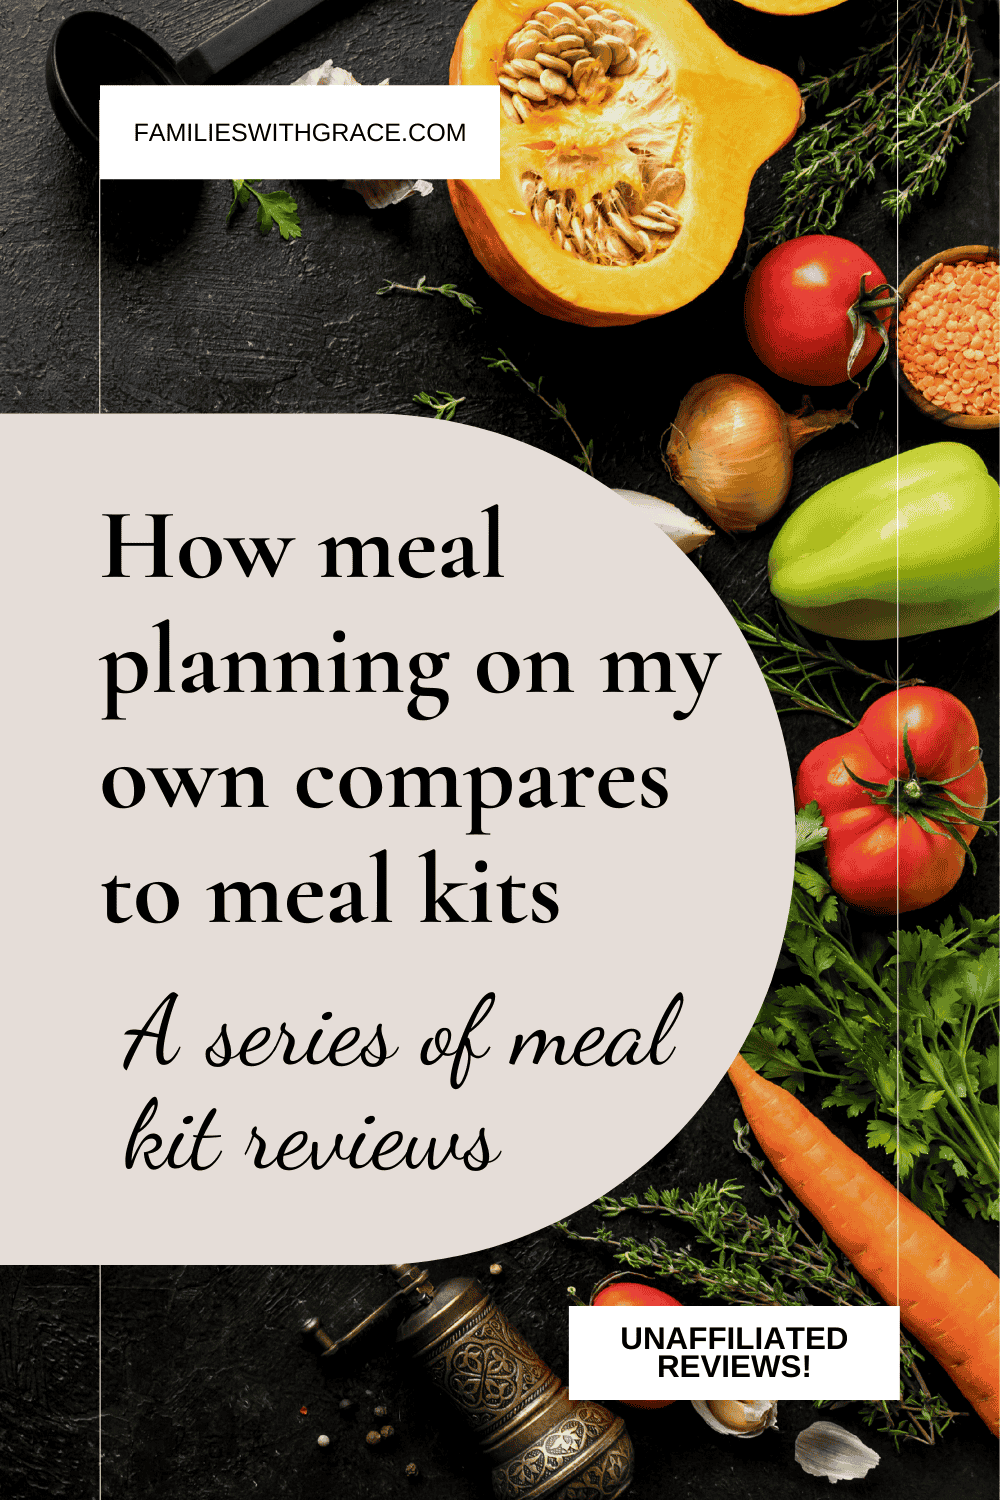 Meal kit reviews: Meal planning on my own